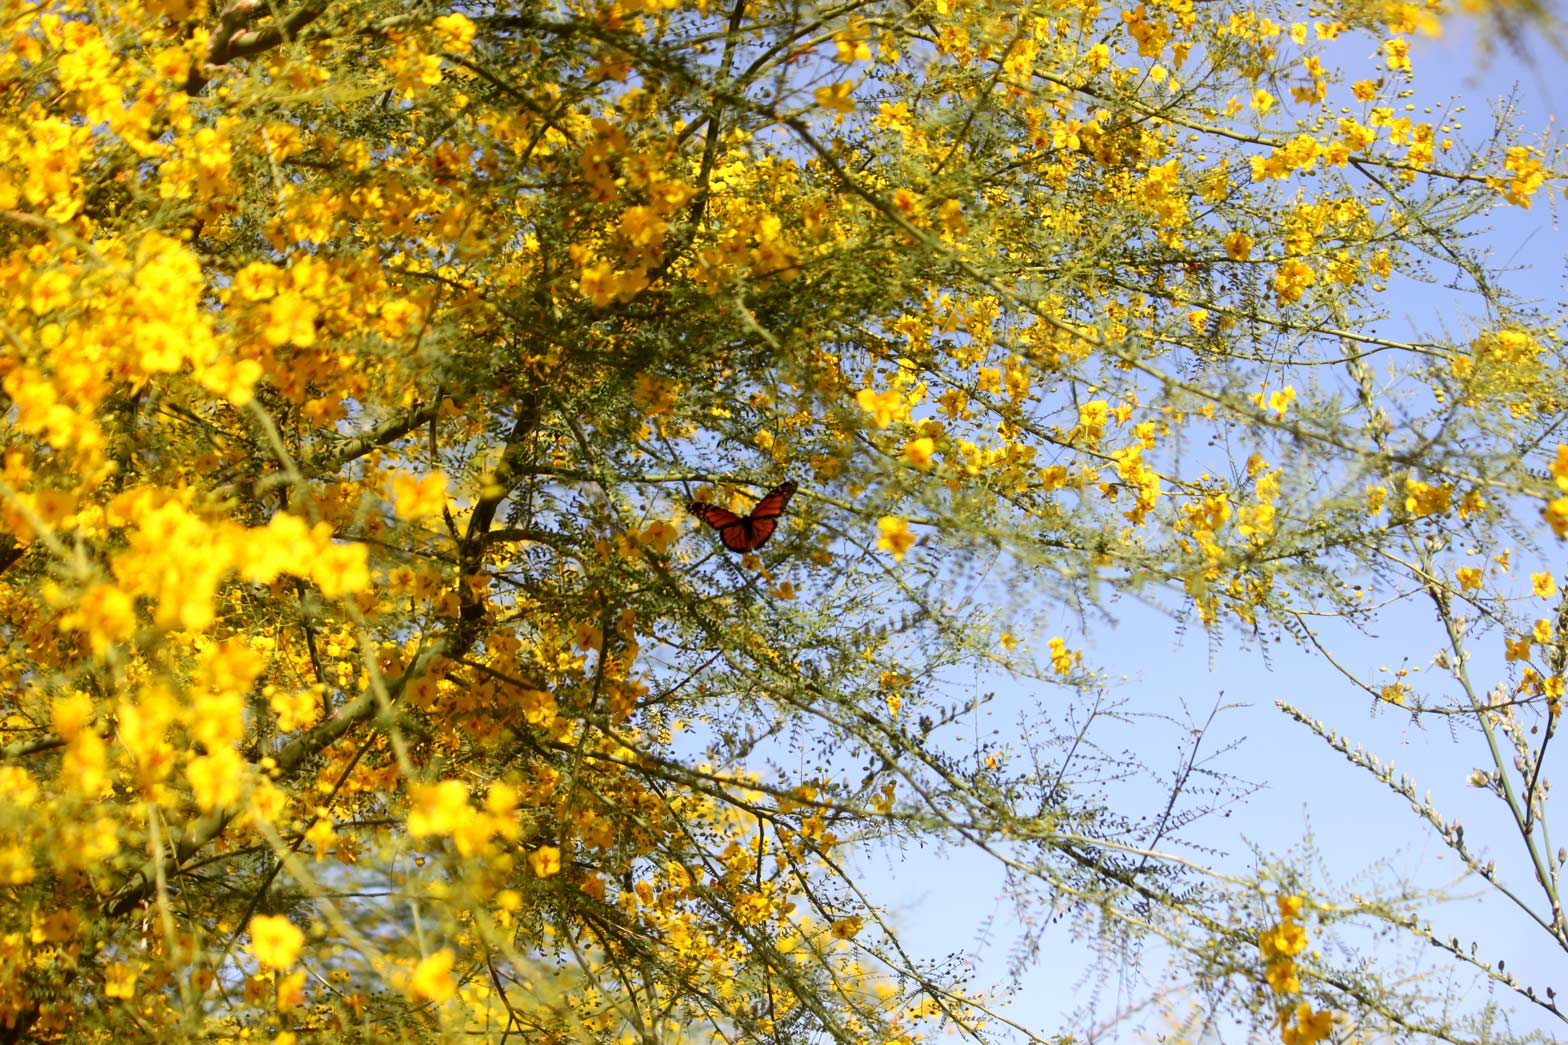 A Monarch butterfly sit on Palo Verde branches full of yellow blooms against a bright blue sky.